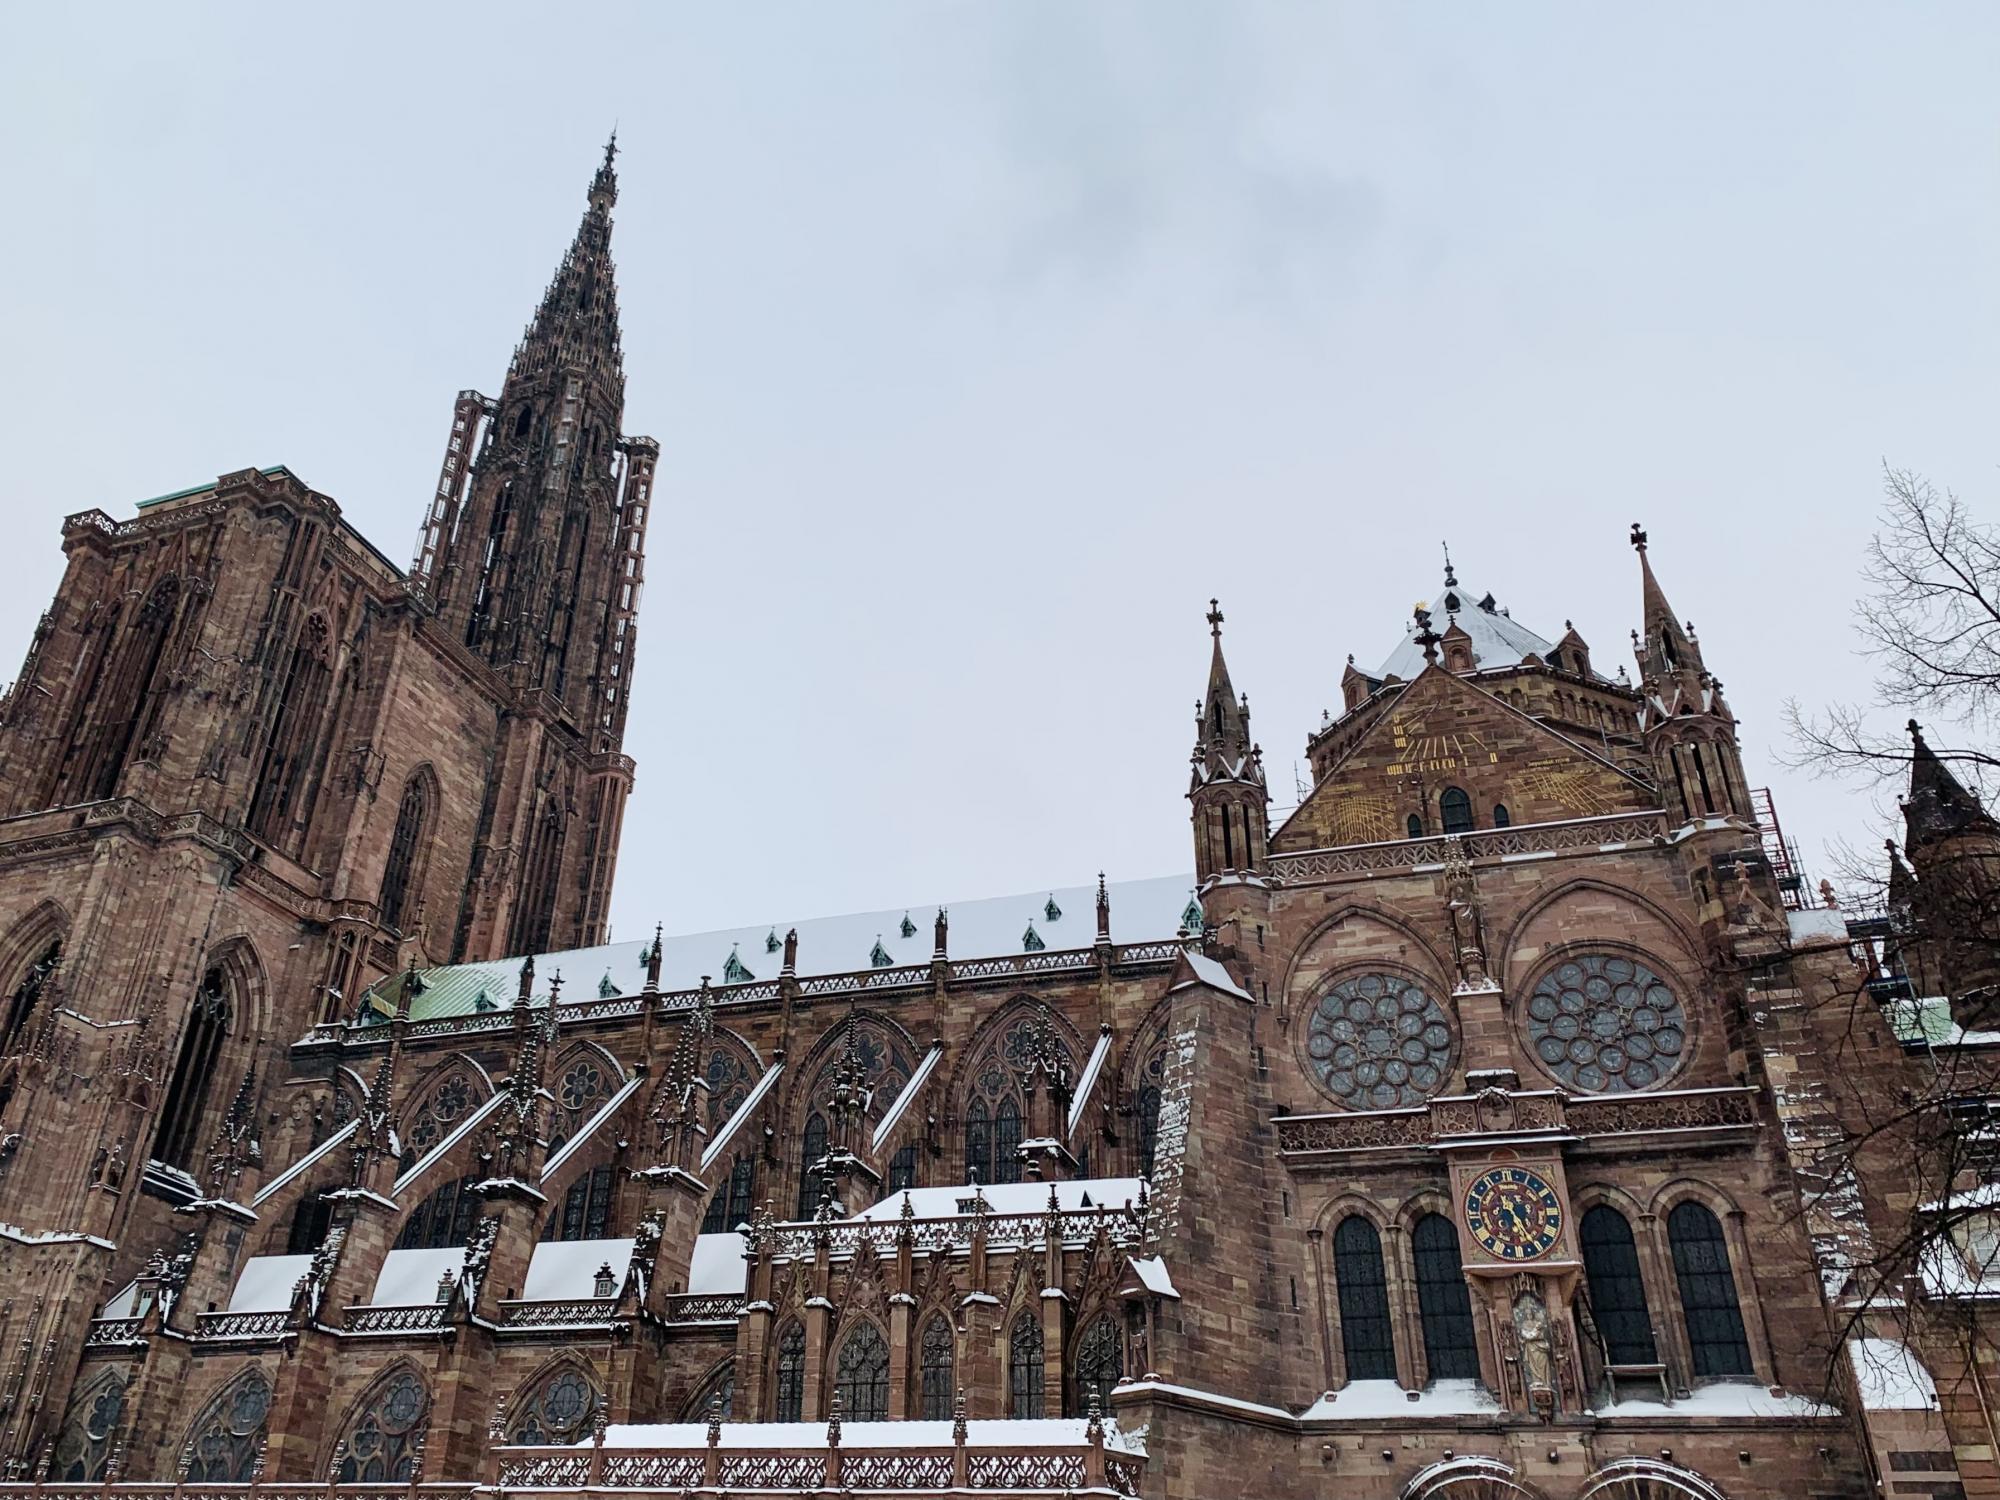 Strasbourg cathedral on a snowy day.